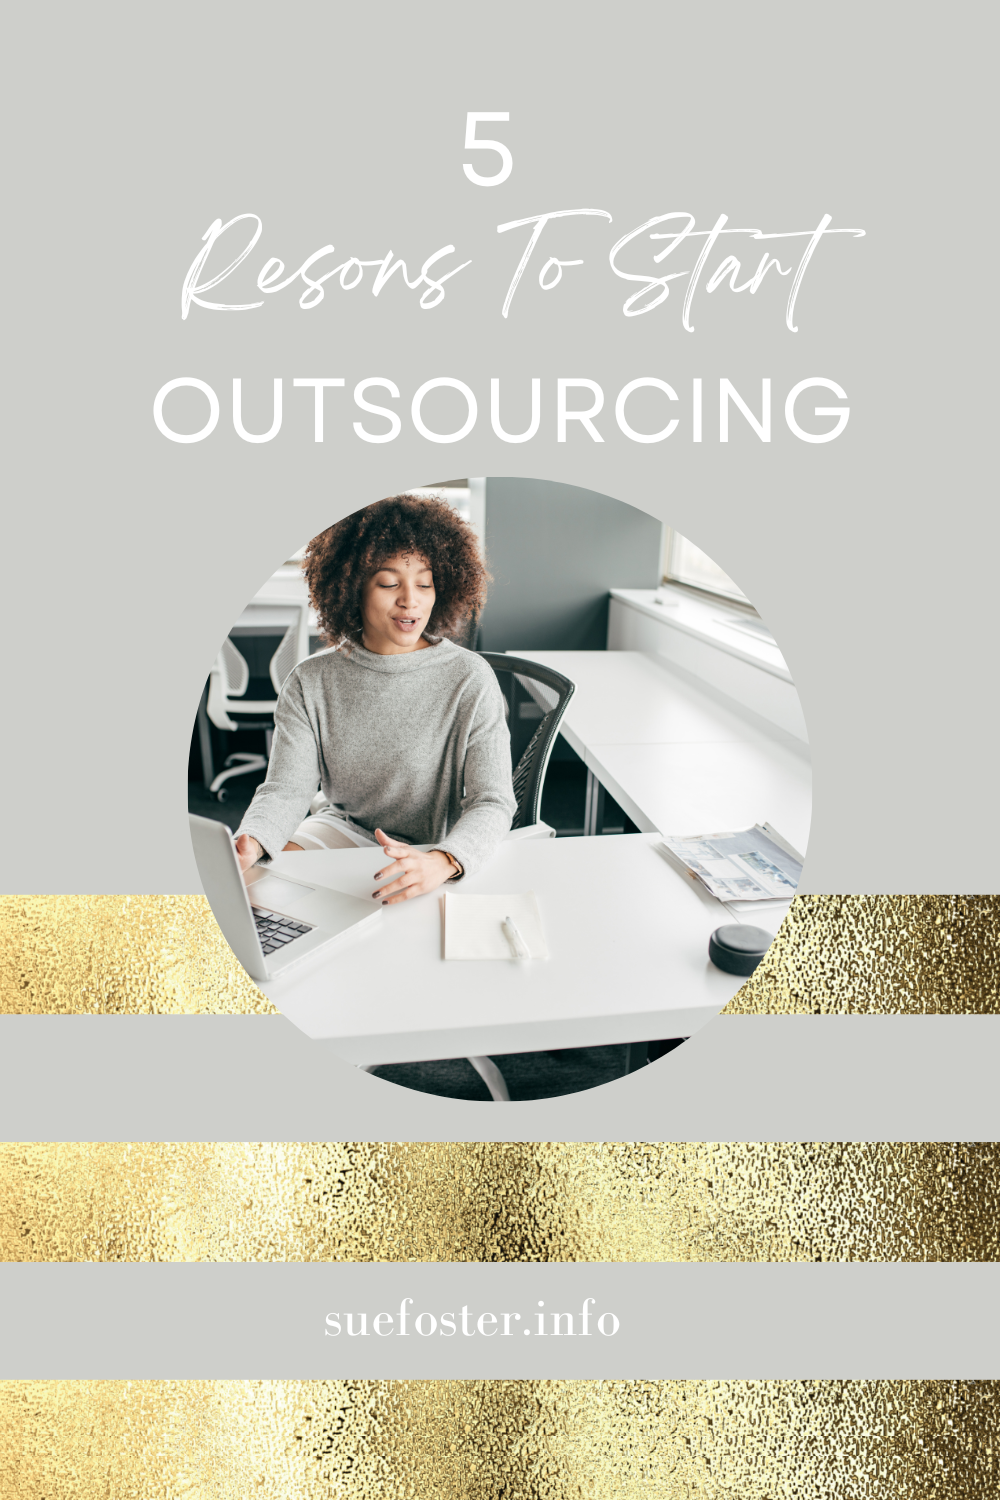 When you are rubbish at IT and the tax return, and the best way to do it is with outsourcing. Let’s take a look at why!